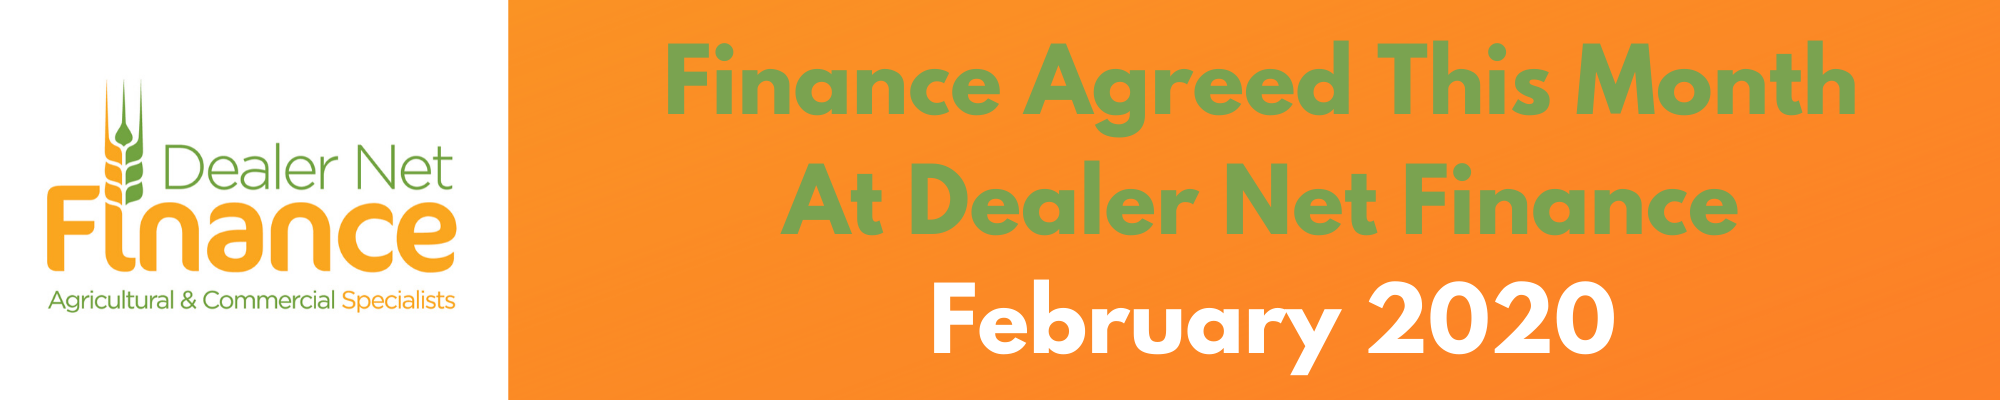 Finance Agreed This Month At Dealer Net Finance – February 2020